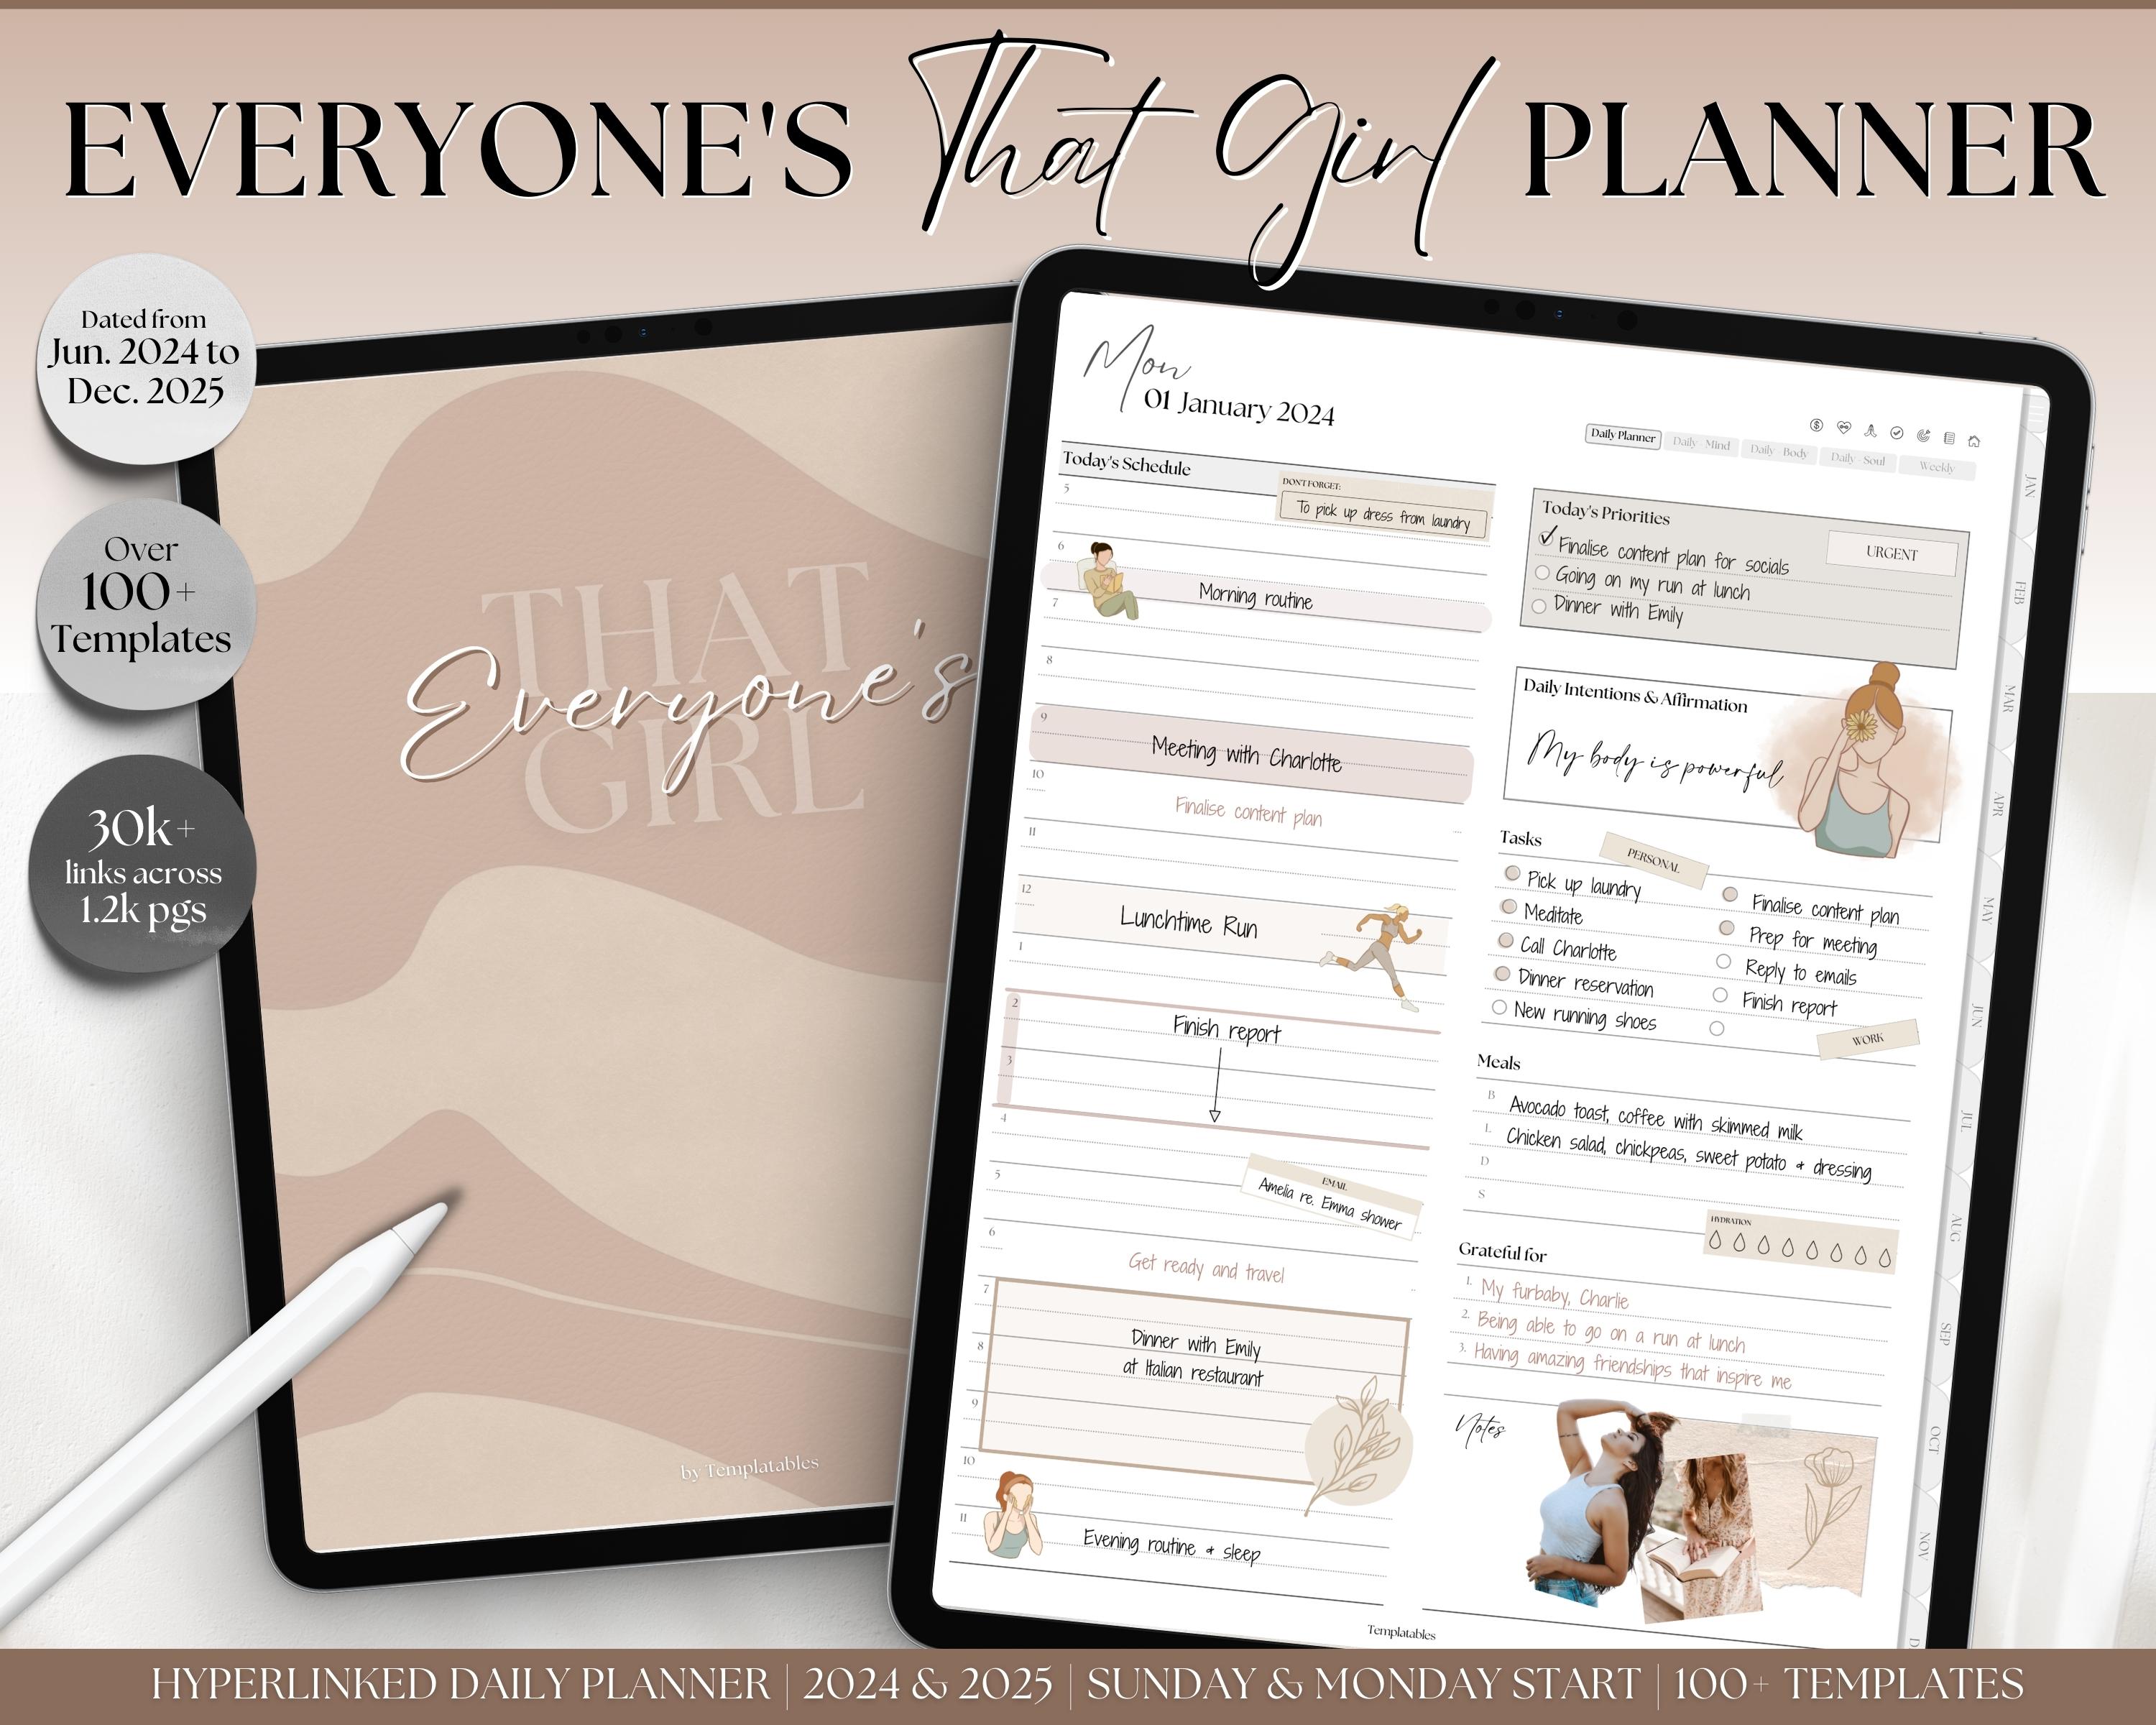 Templatables Unveils the 2024 'Everyone's That Girl' Digital Planner, Redefining Productivity with a Unique Perspective